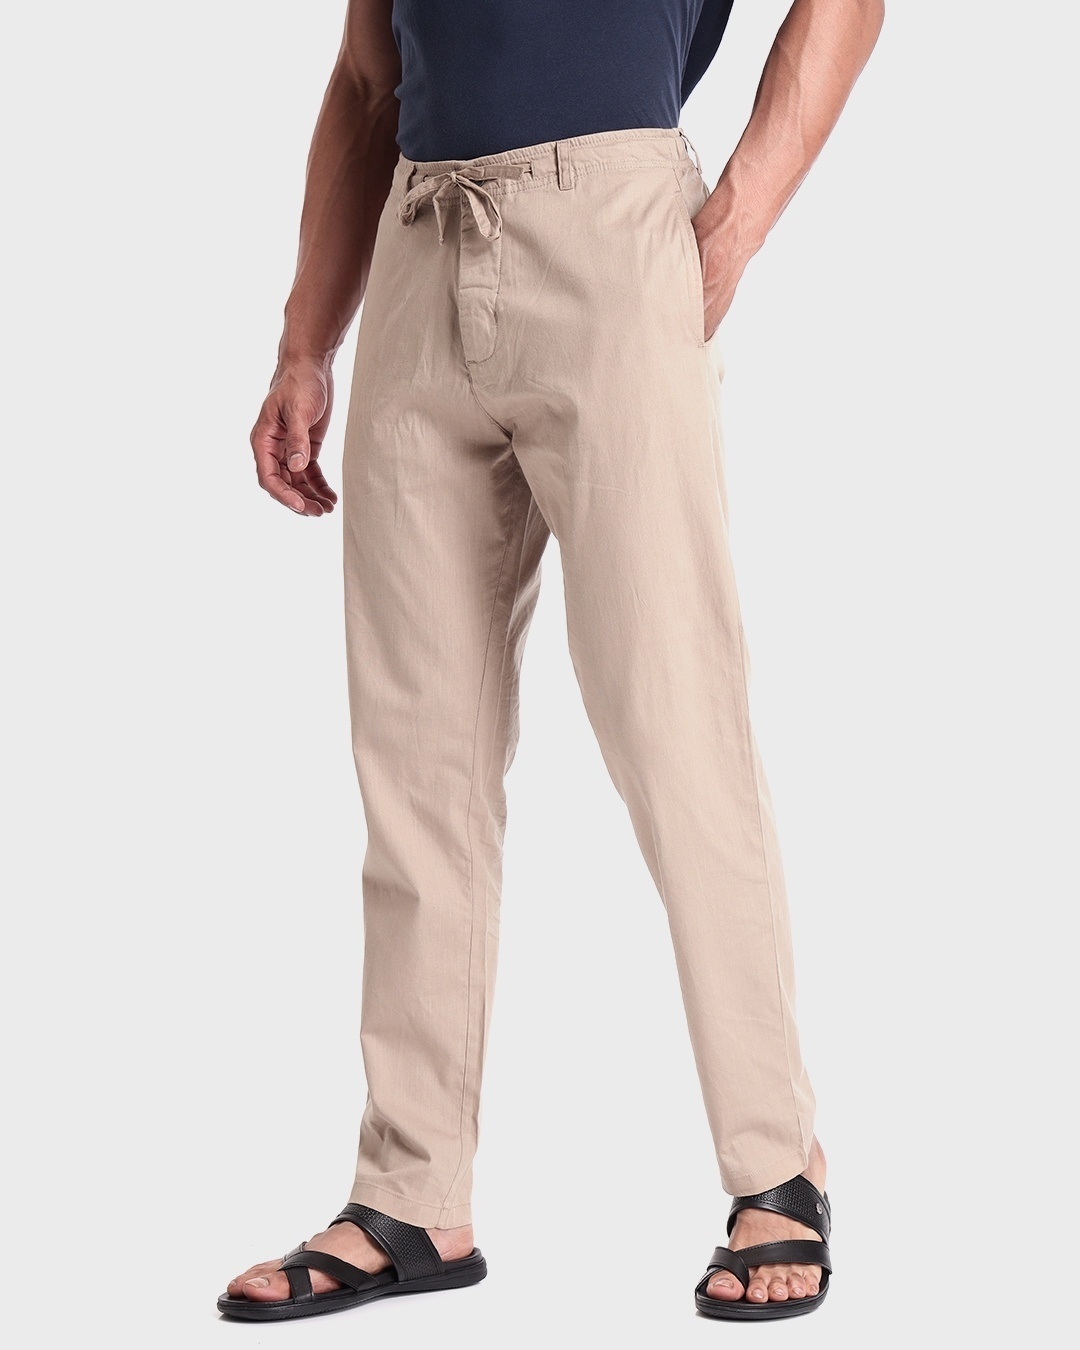 Details more than 94 mens lightweight summer cotton trousers - in ...